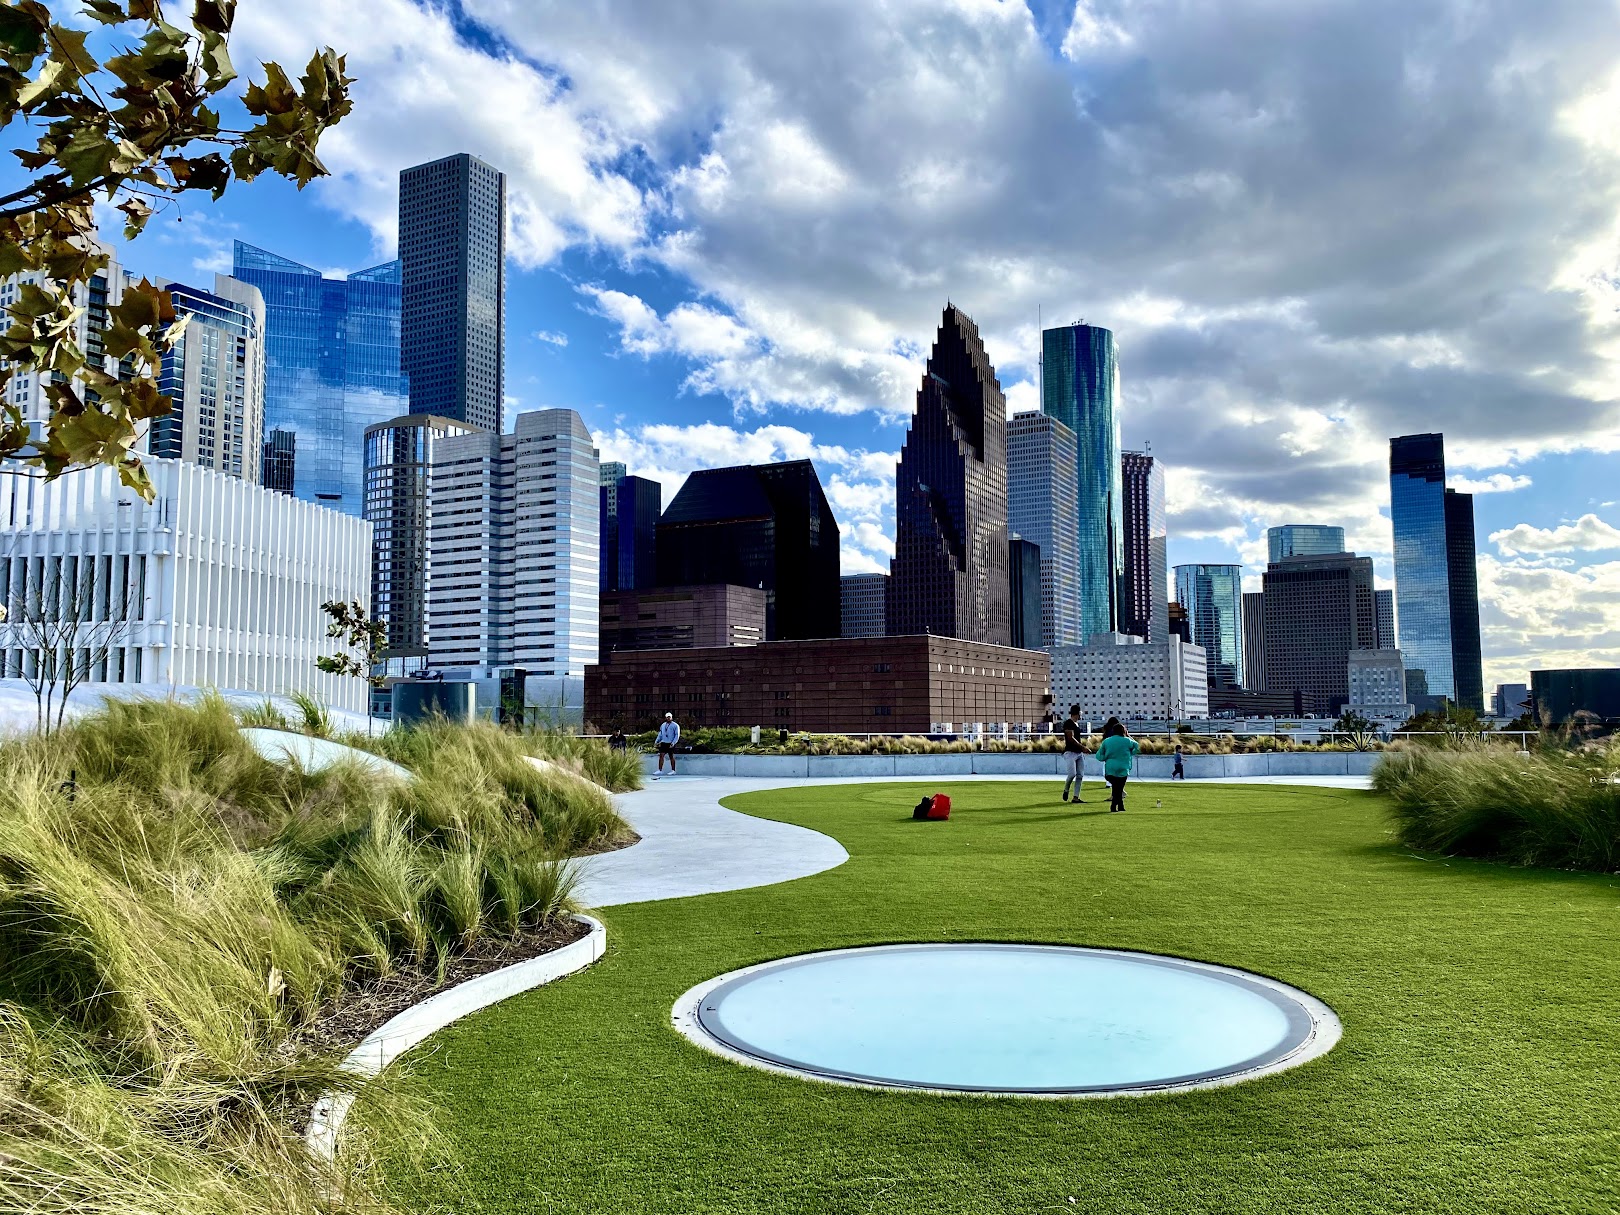 11 scenic parks in Houston perfect for picnics and relaxing